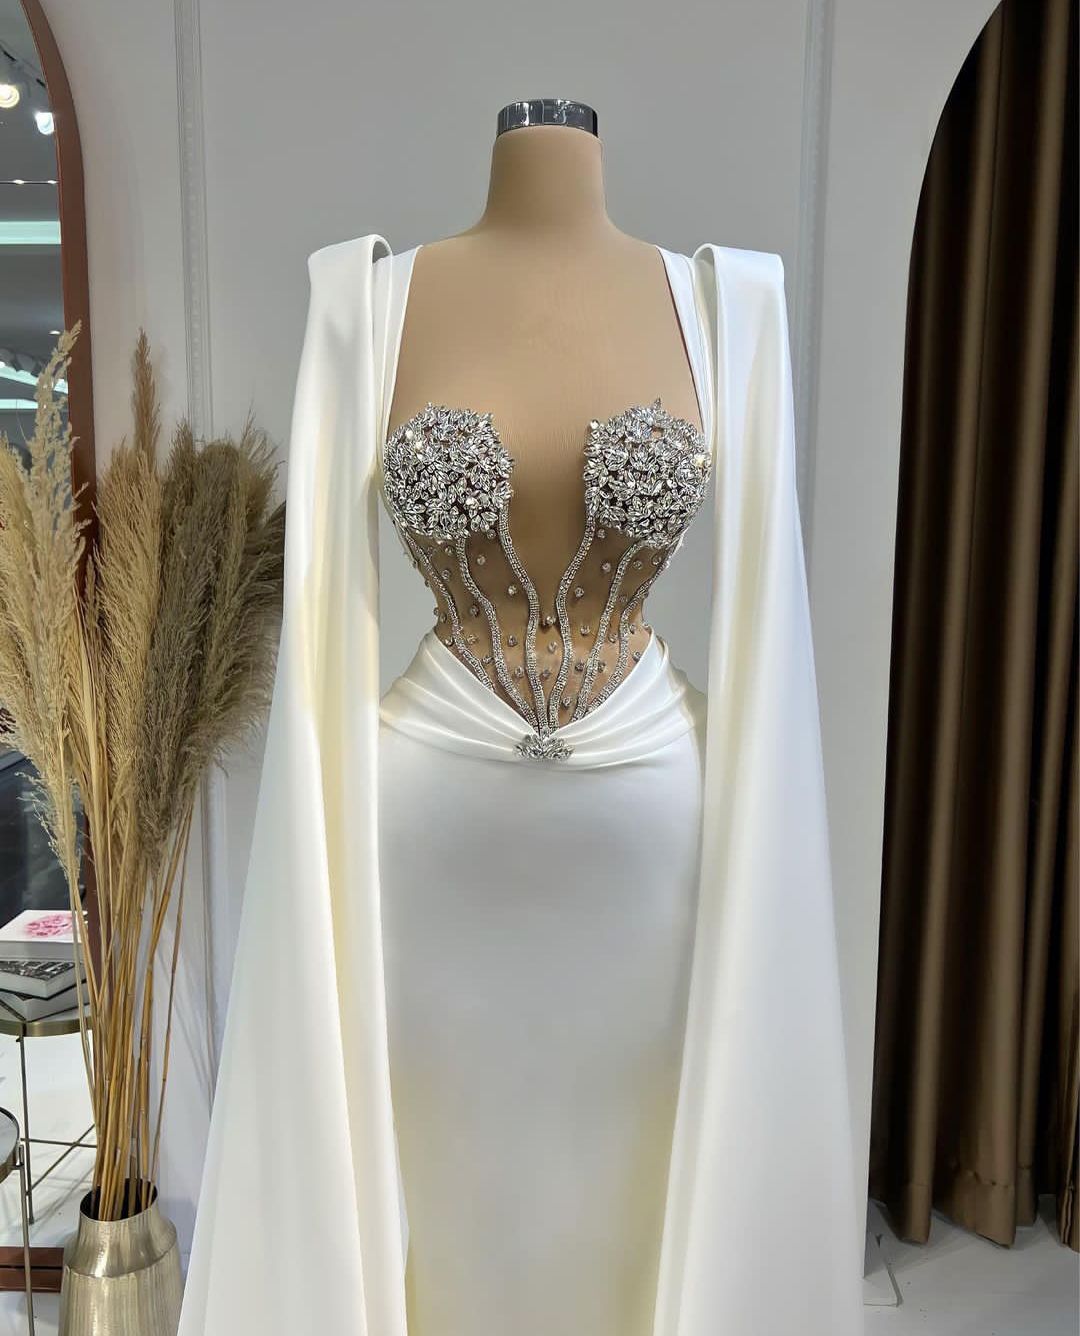 Sexy Evening Dresses Sleeveless Deep V Neck Capes Satin Beaded Appliques Sequins Pearls Diamonds Floor Length Celebrity Formal Prom Dresses Gowns Party Dress